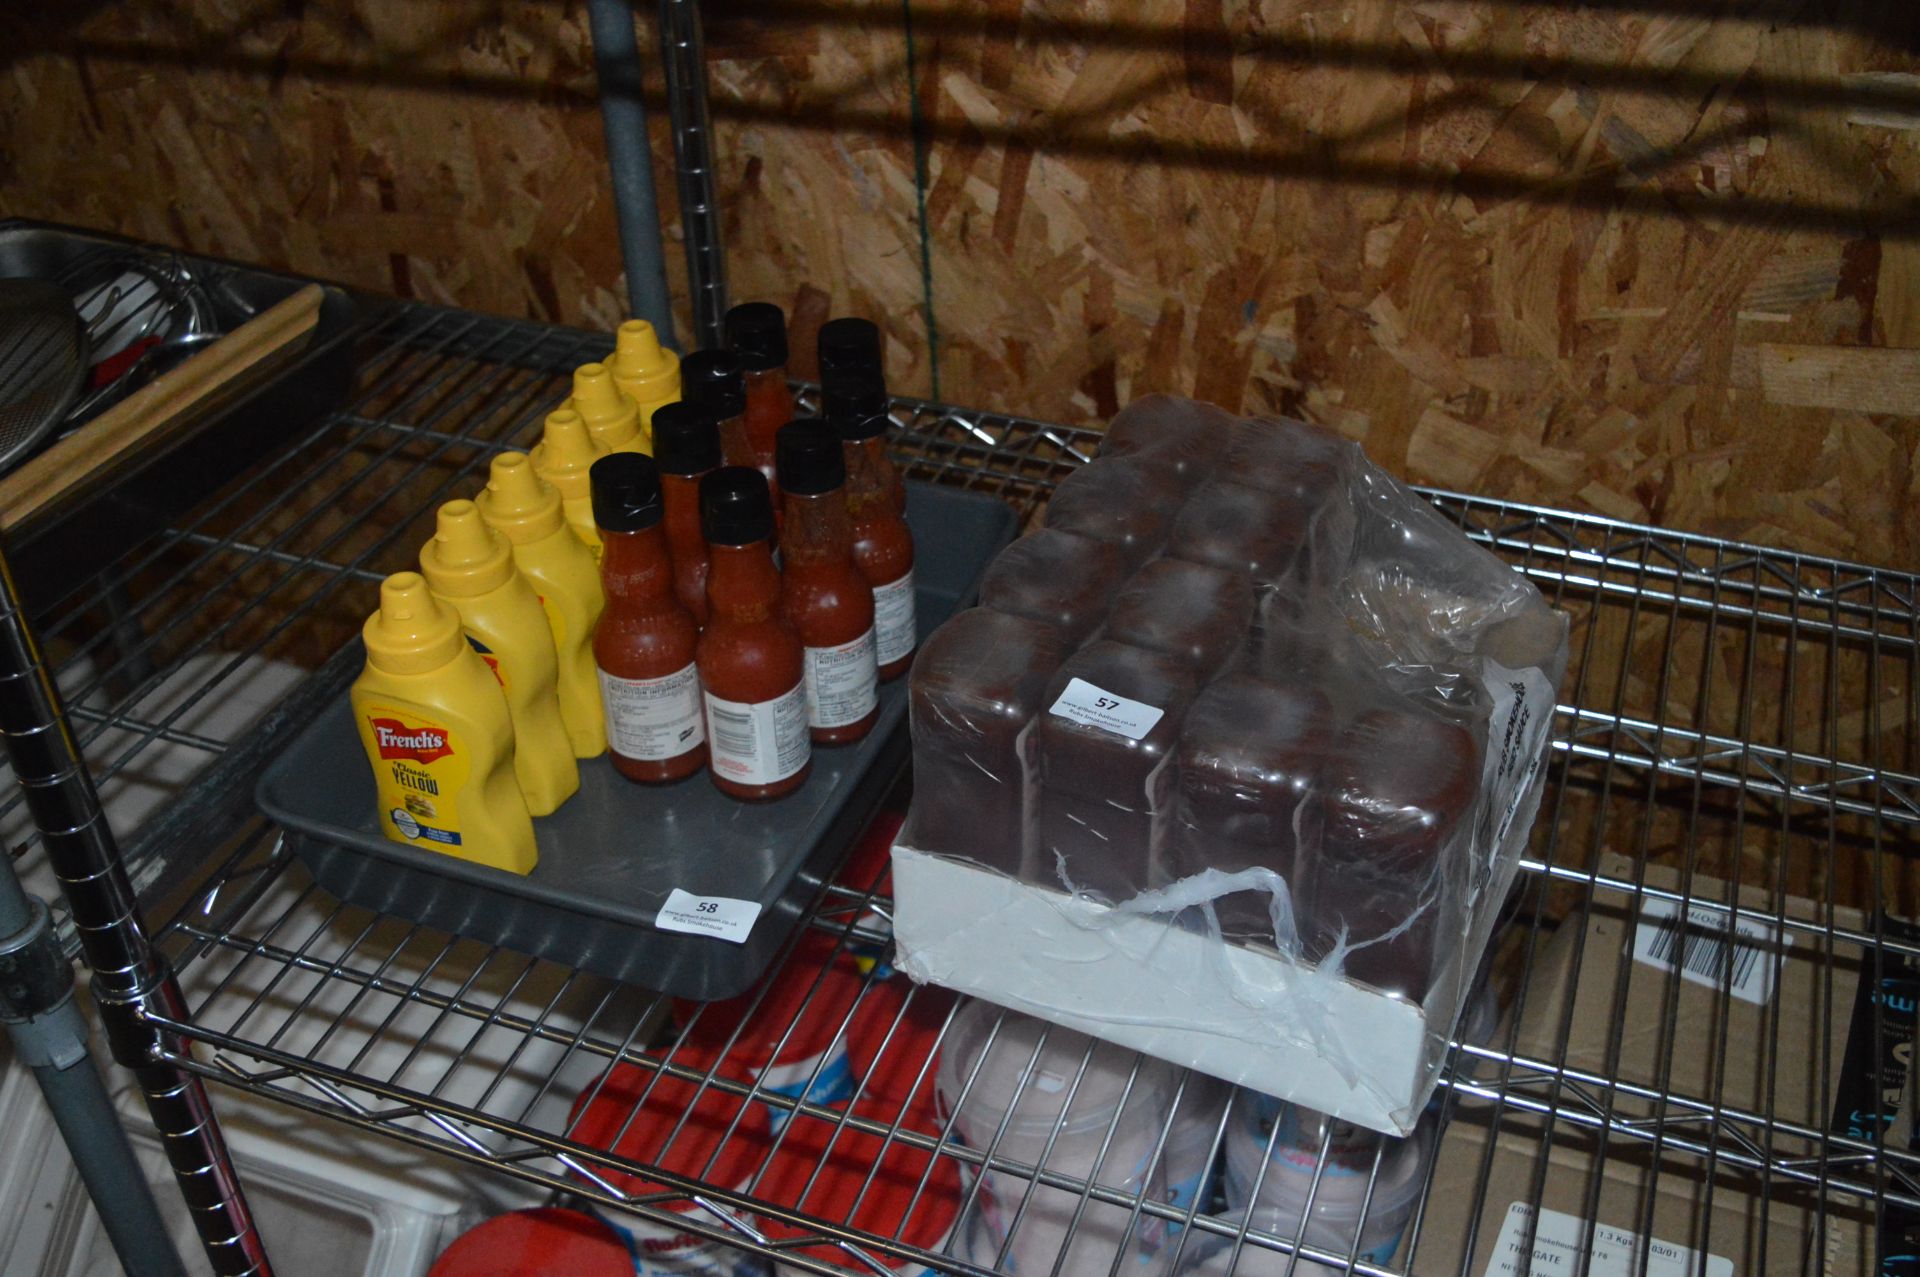 *Six Tubs of Frankie's Mustard and Eight Bottles of Frankie's Chili Sauce